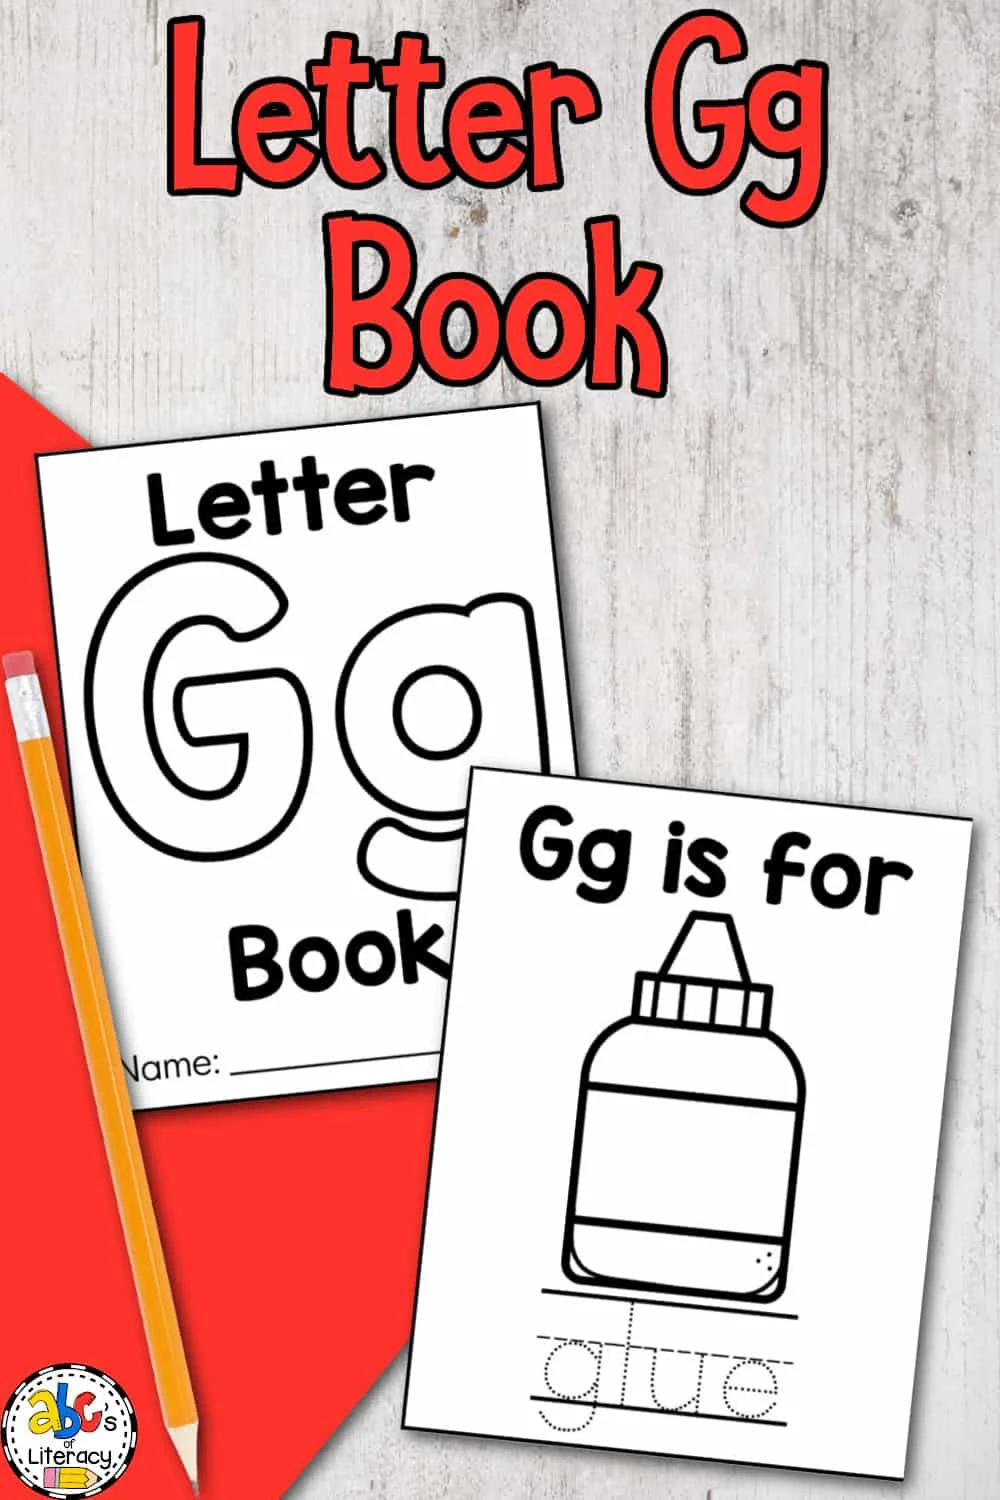 Letter g book